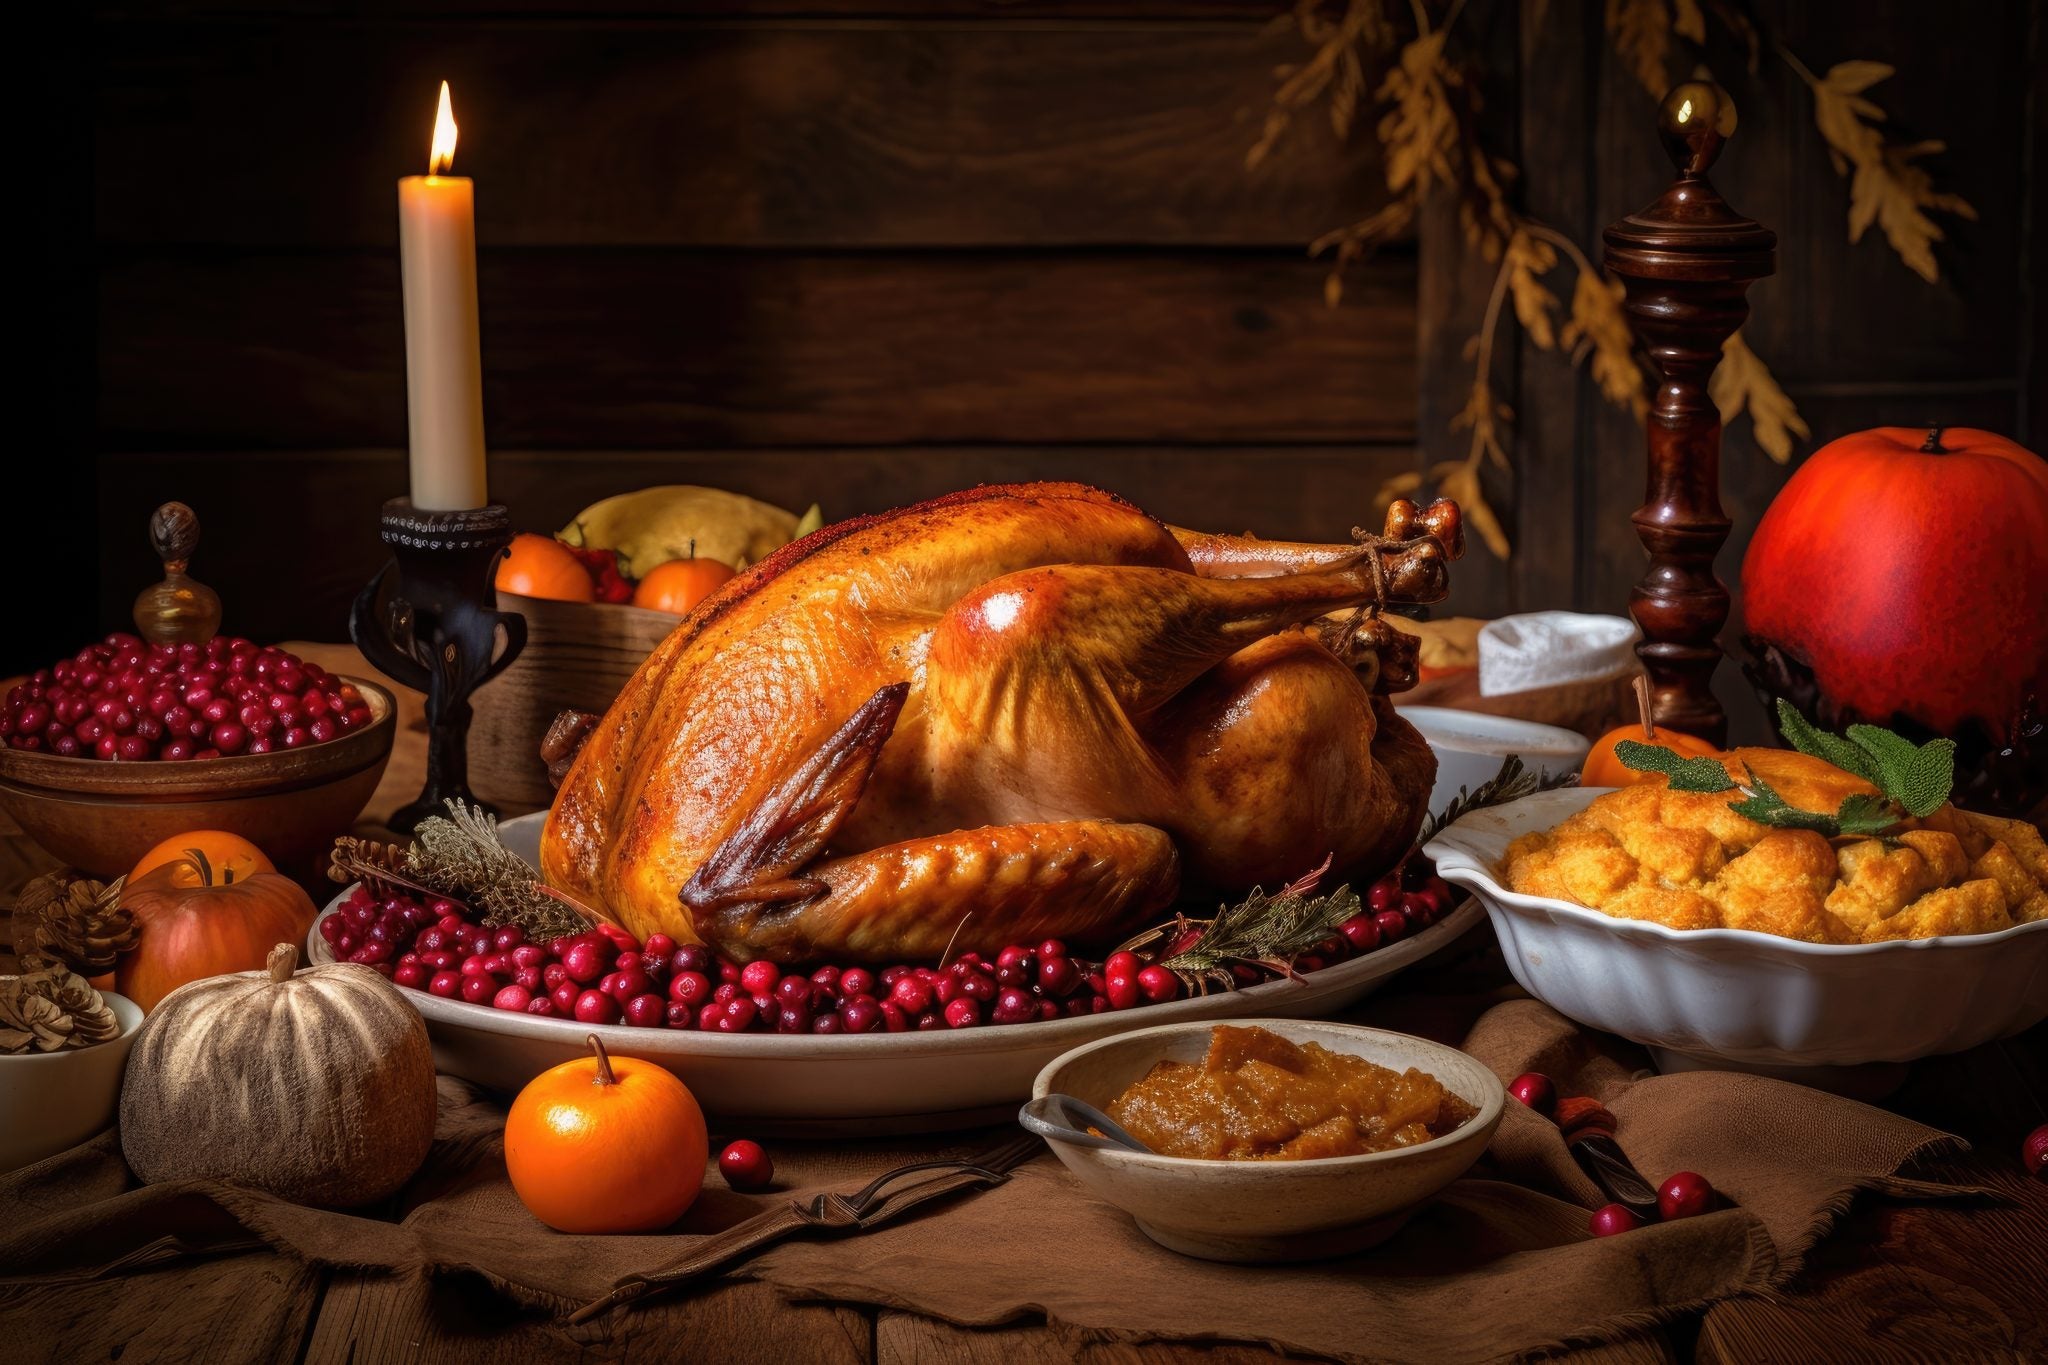 THE SEASON OF GRATITUDE: REFLECTING ON THANKSGIVING AND PULLCAST’S BLESSINGS